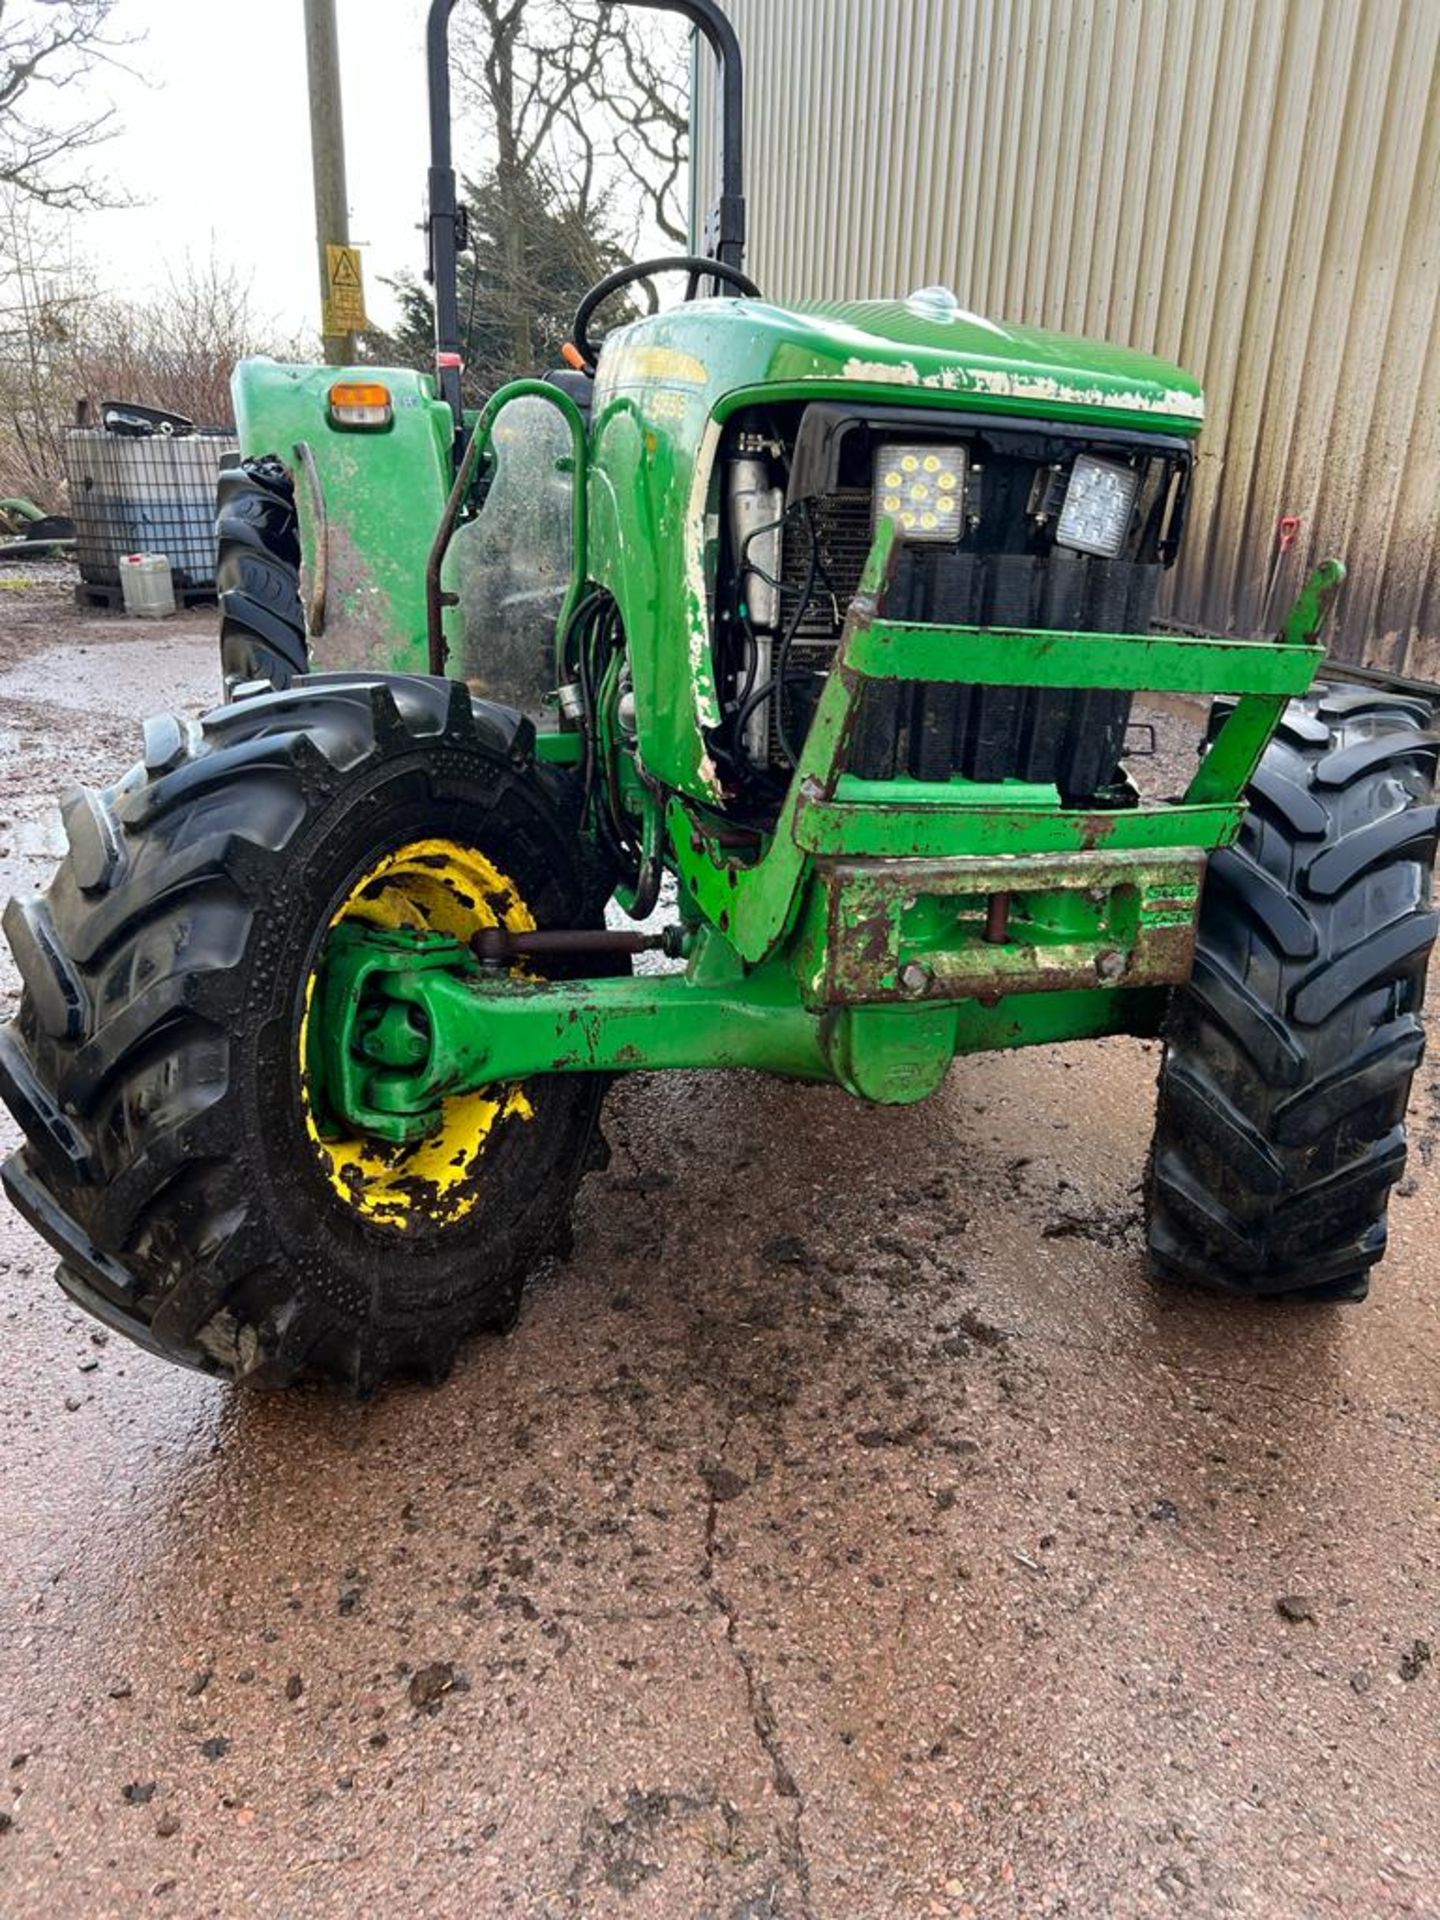 2015 JD 5055E TRACTOR - 10500 HOURS - IN WORKING ORDER